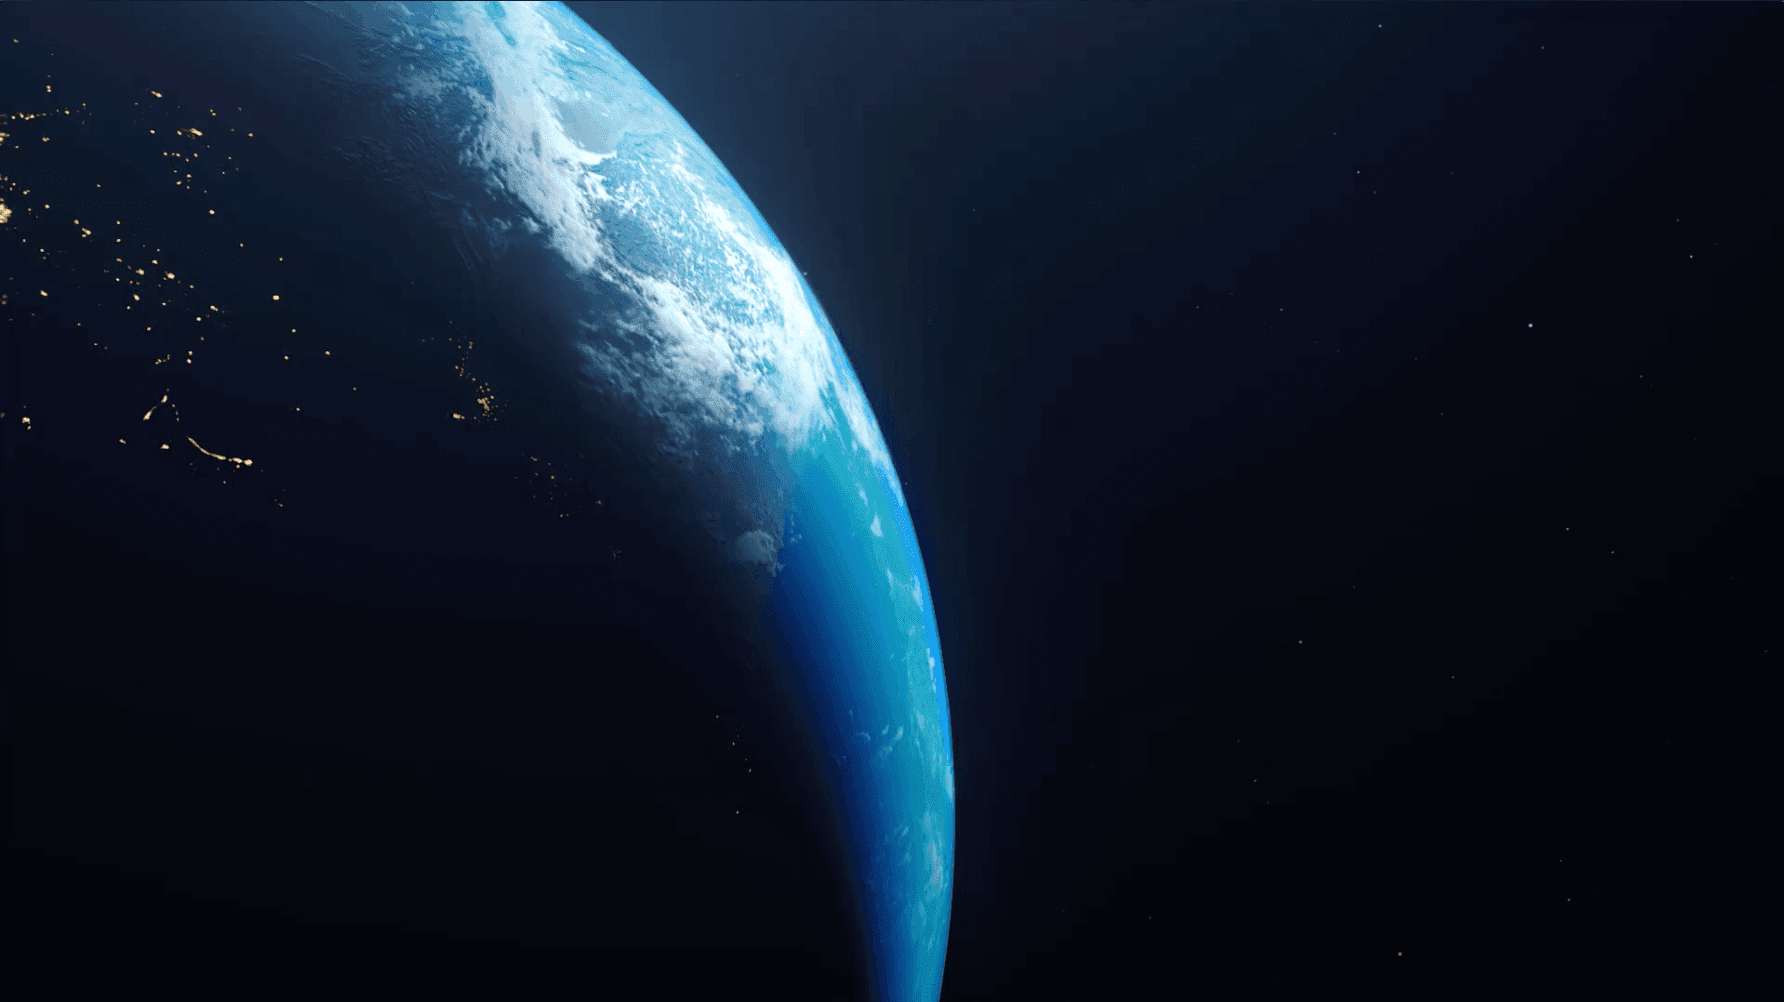 Intro background image - Rotating earth